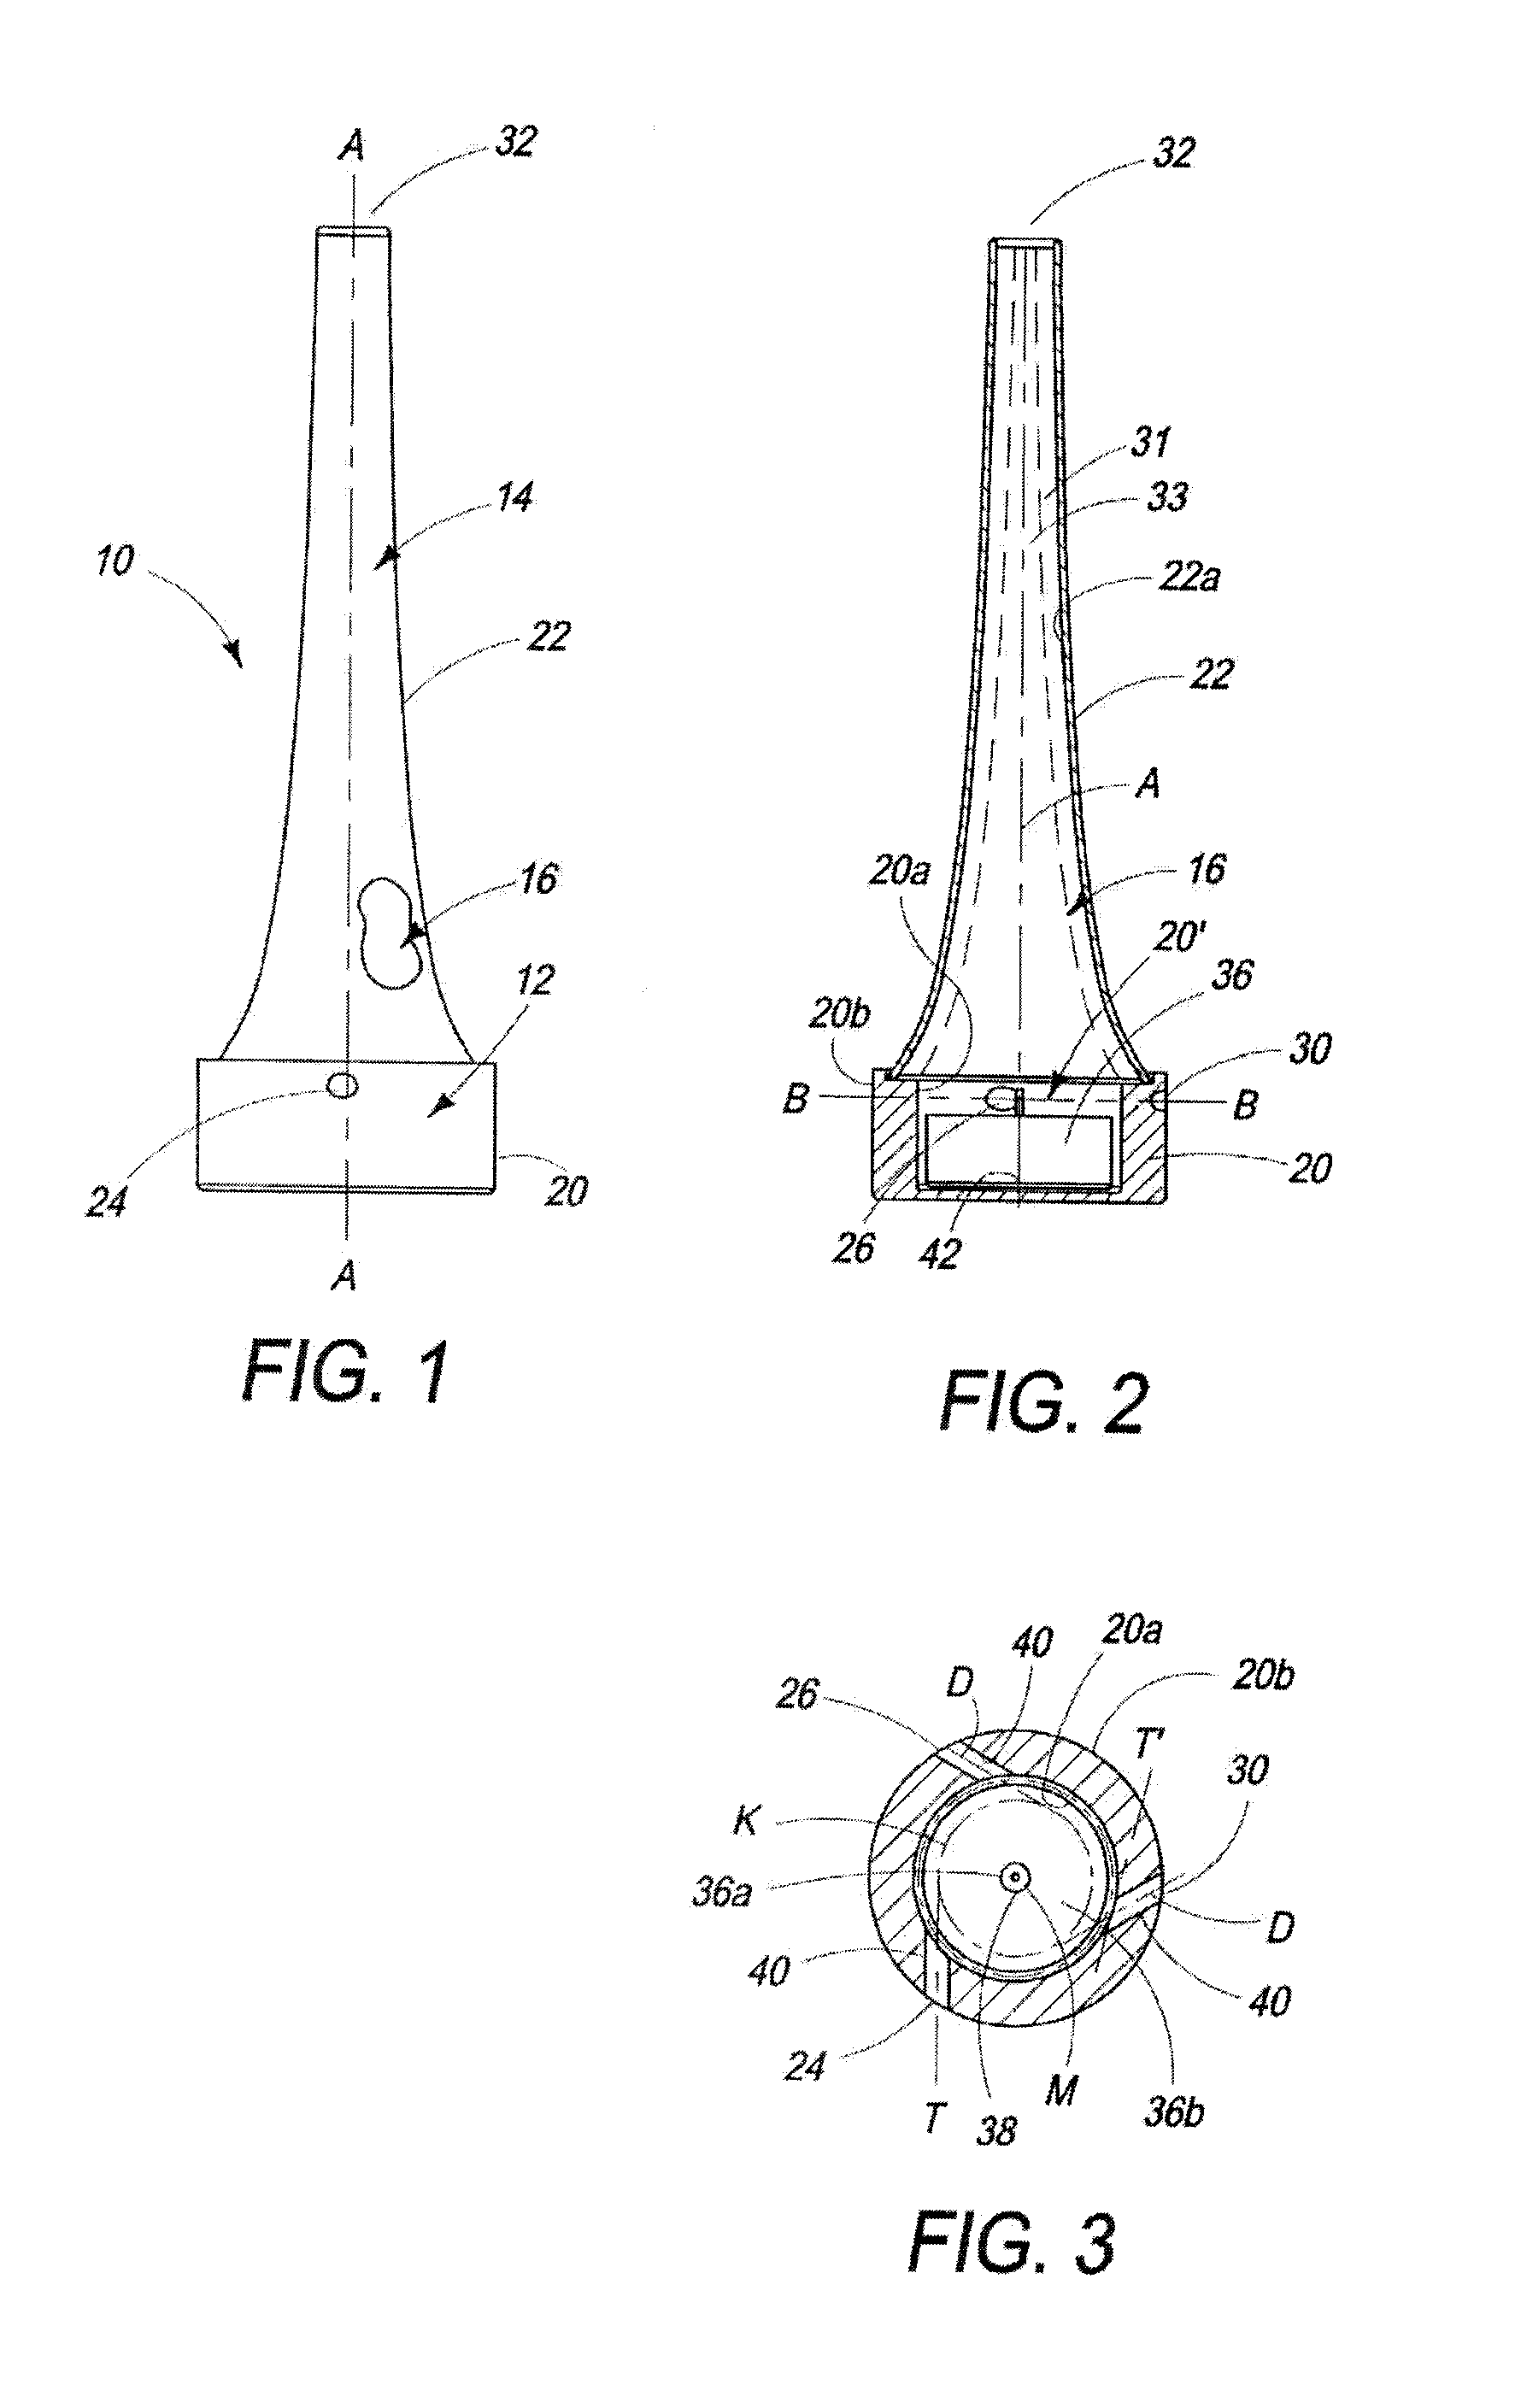 Apparatus and method for extinguishing a flame upon disturbing the apparatus